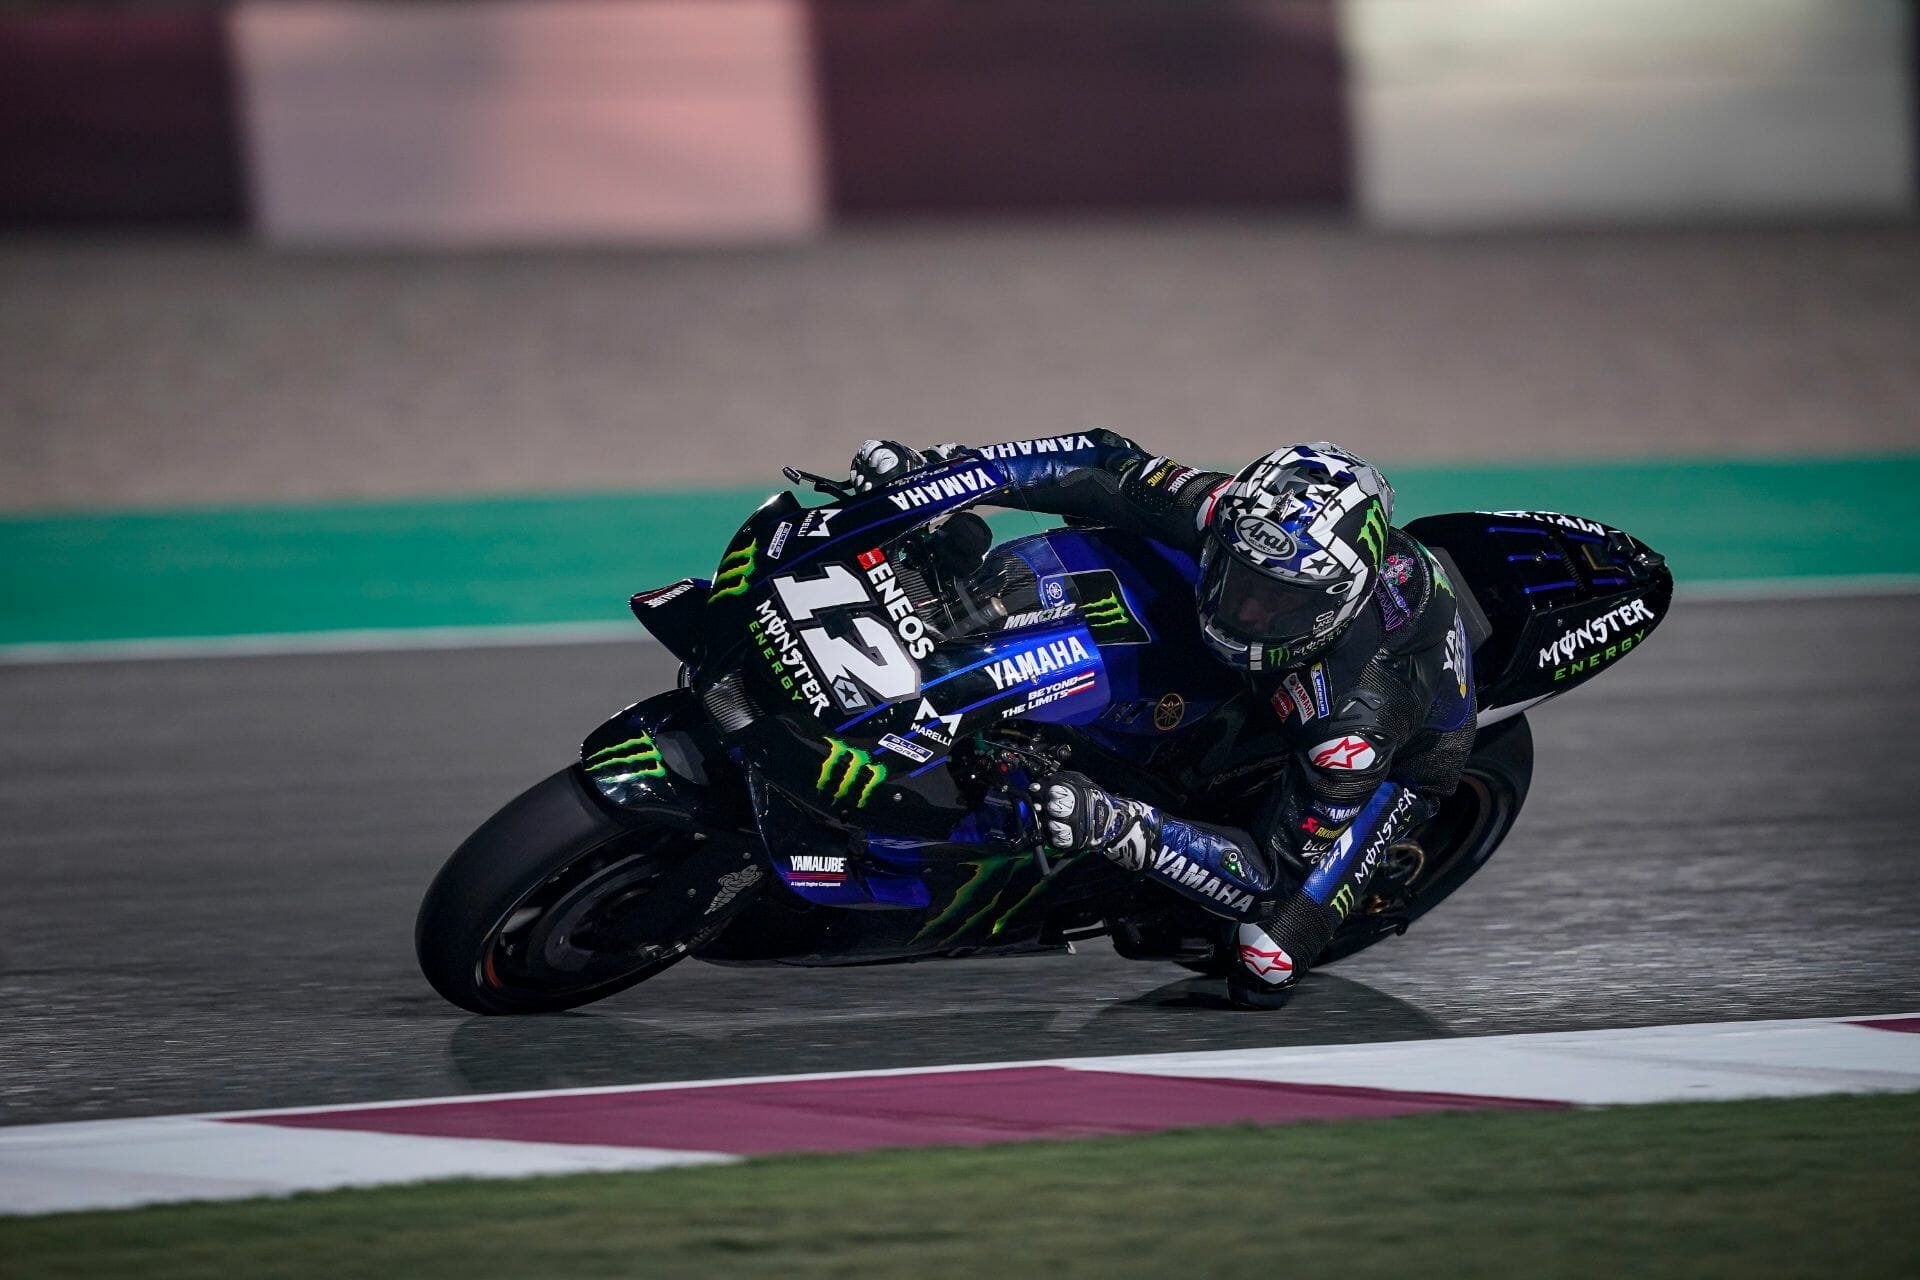 MotoGP - Vinales takes first win in 2021
- also in the MOTORCYCLES.NEWS APP